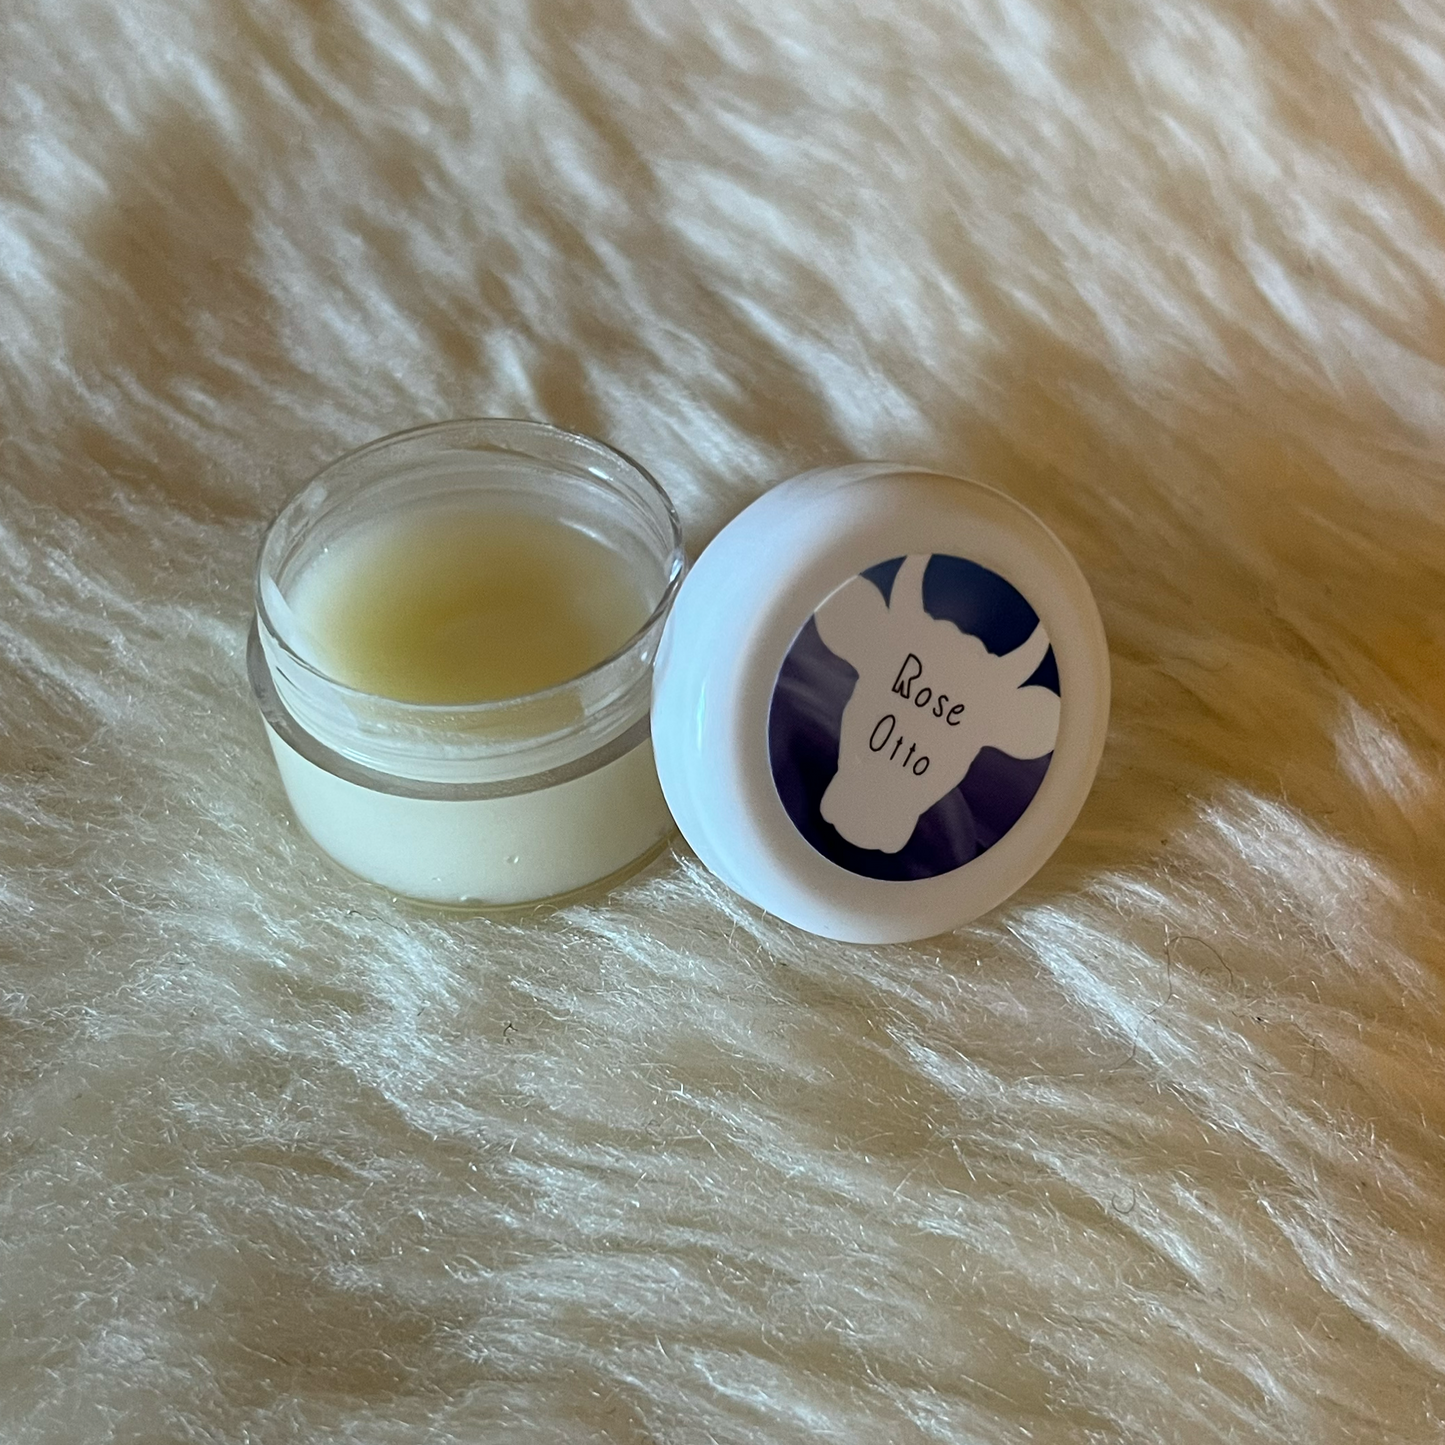 100x Washed Ghee with Rose Otto Radiant Skin Cream